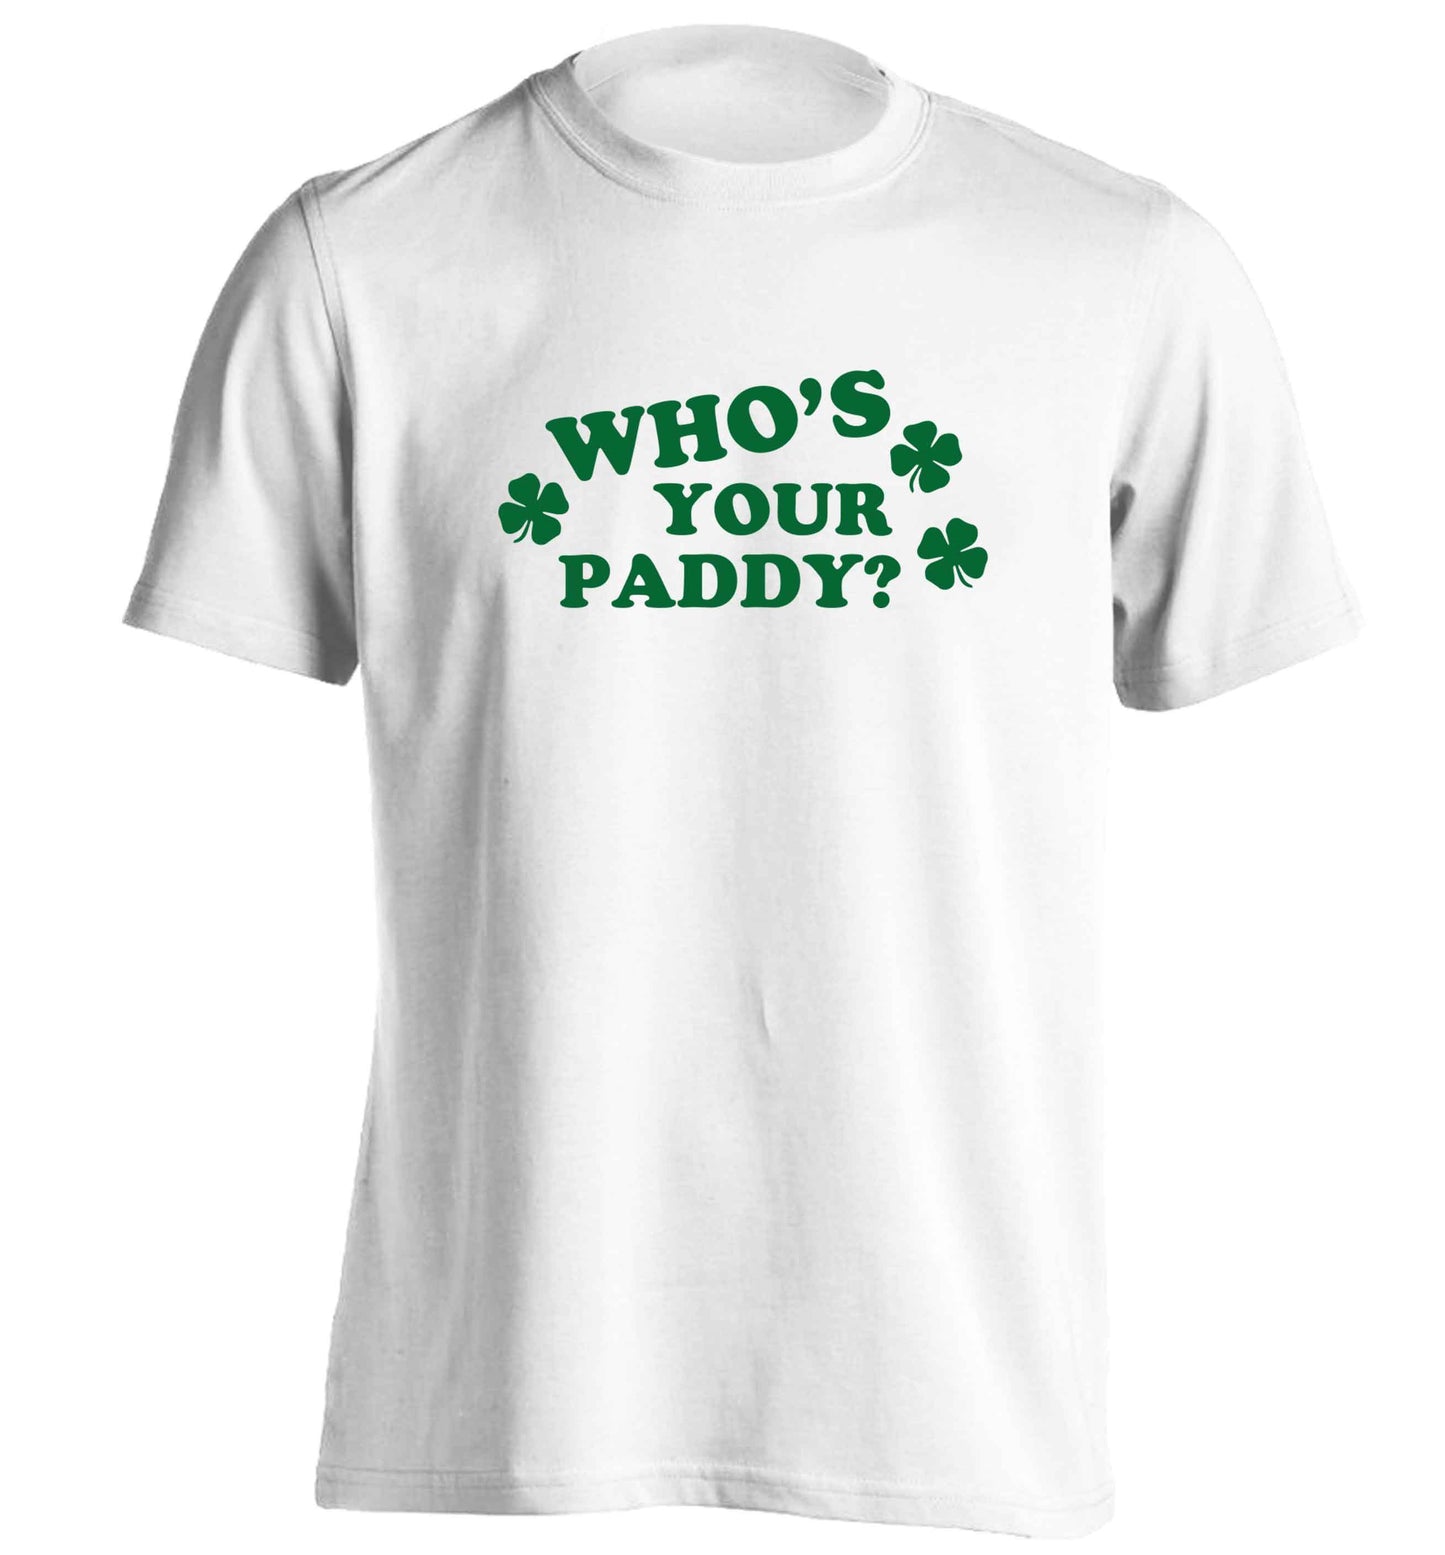 Who's your paddy? adults unisex white Tshirt 2XL